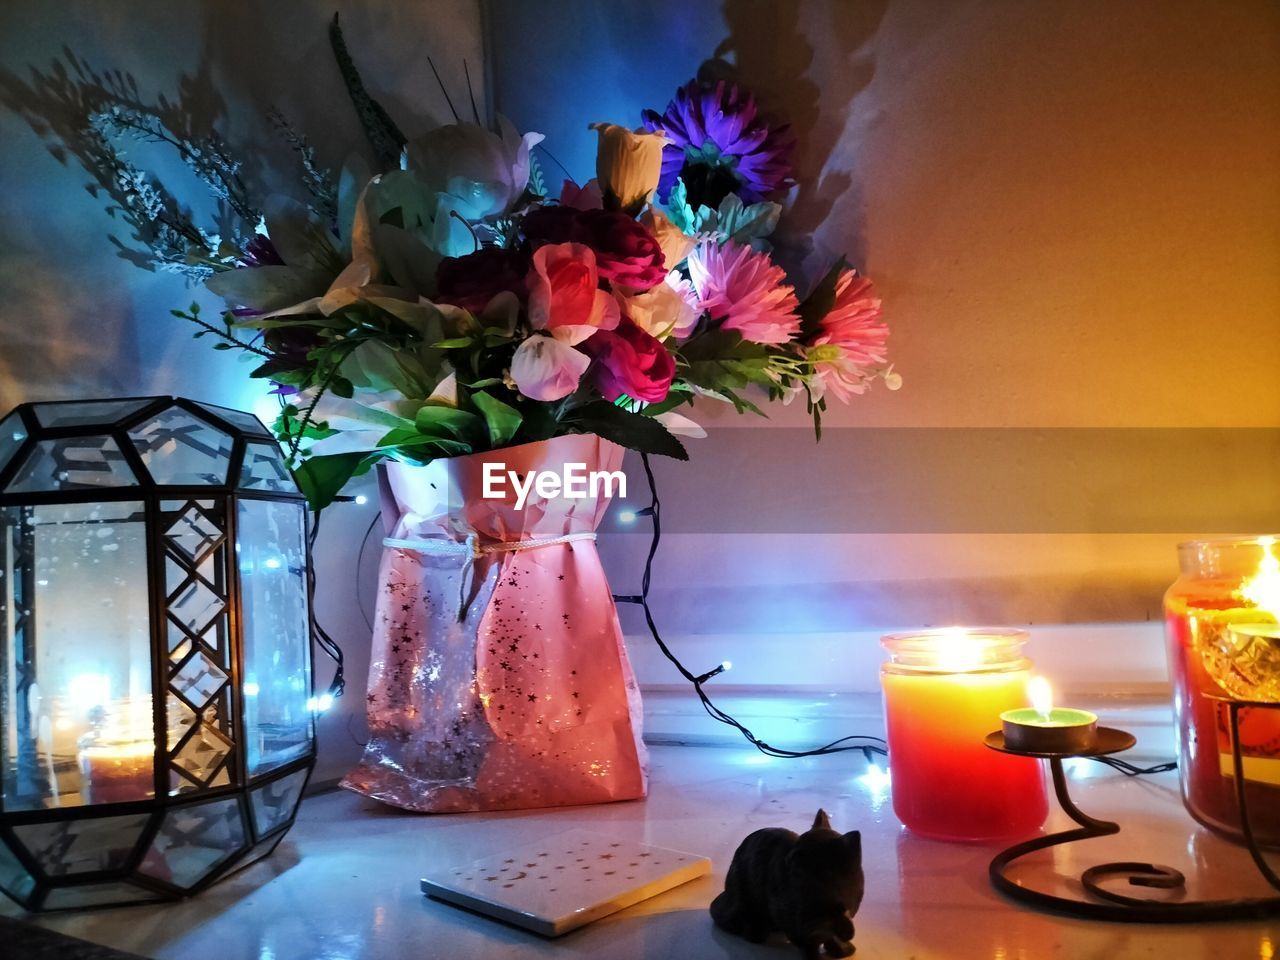 flower, flowering plant, plant, vase, nature, table, candle, beauty in nature, centrepiece, indoors, no people, flower arrangement, freshness, decoration, arrangement, still life, home interior, multi colored, furniture, bouquet, illuminated, lighting equipment